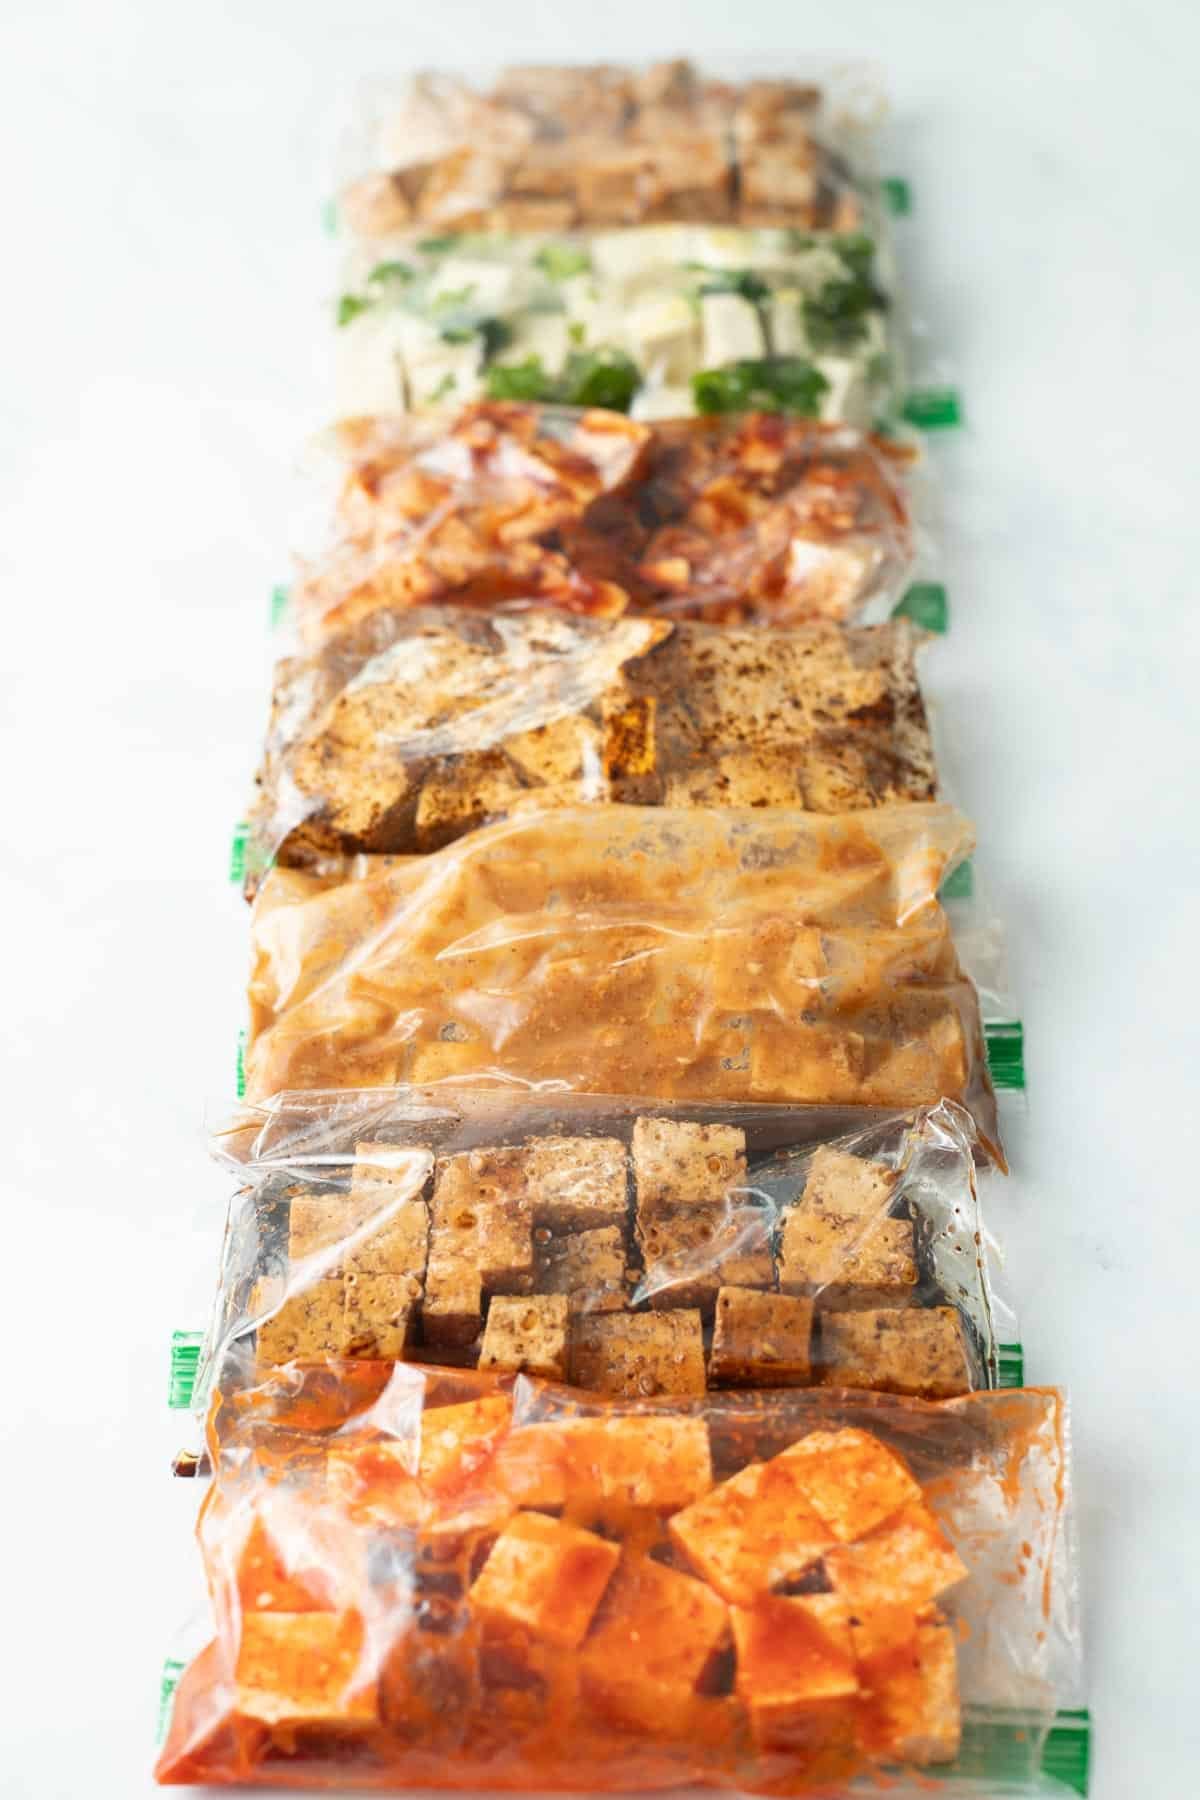 Tofu marinating in baggies in different sauces.
